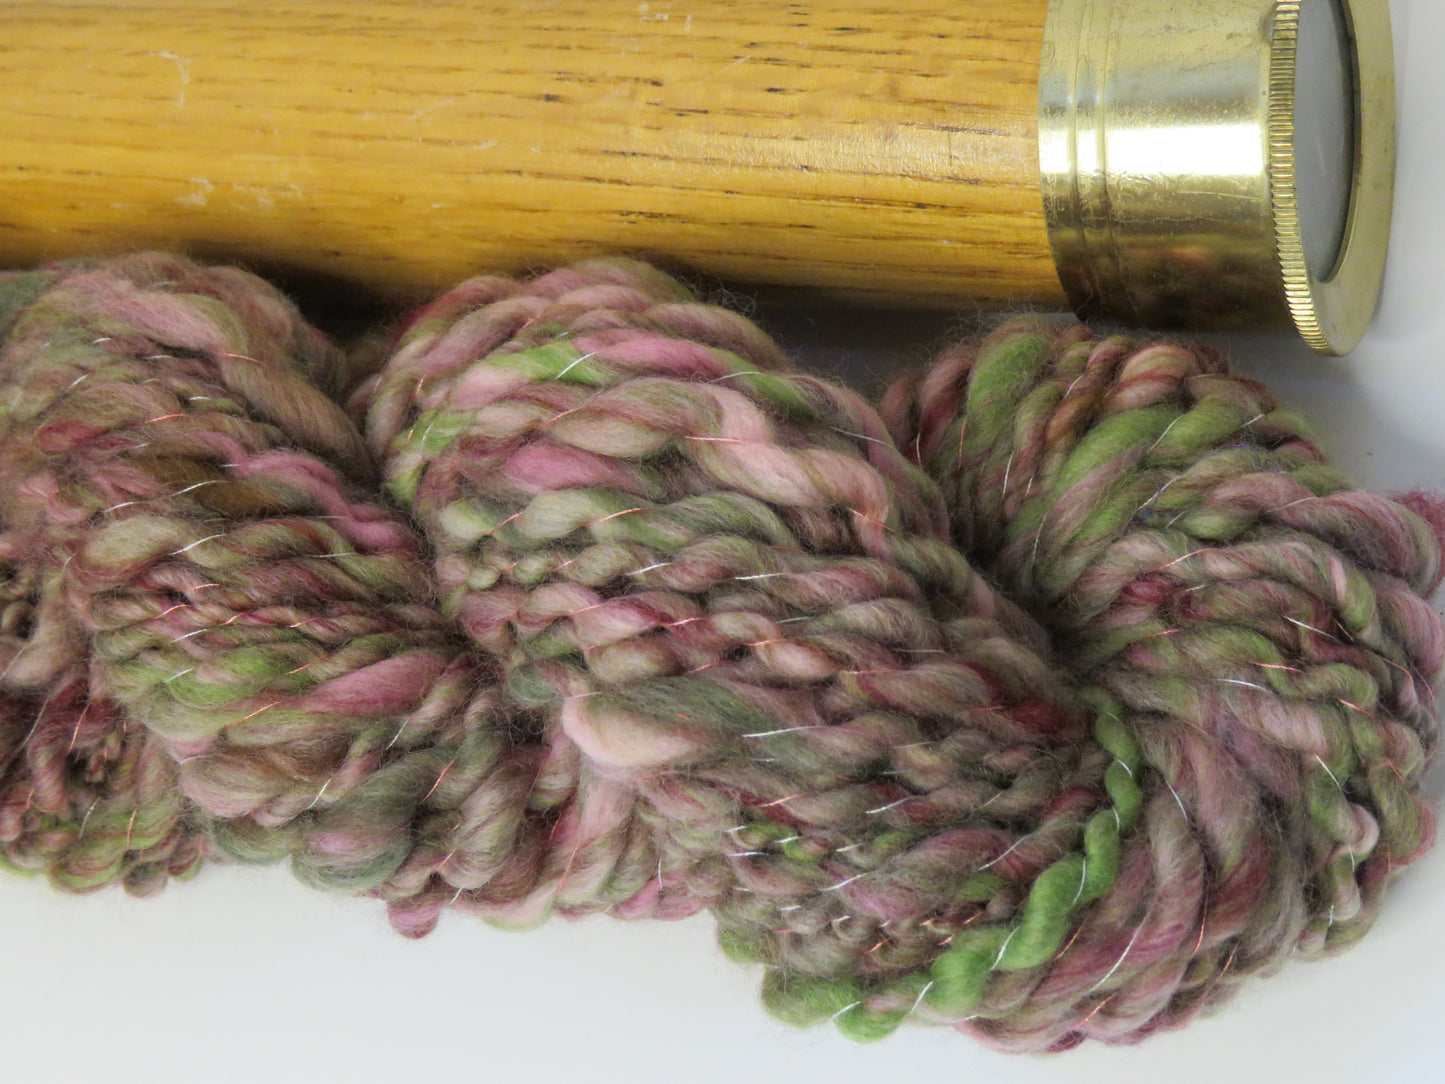 Yarn Y23104 Hand Spun Art Yarn, 2-ply thick and thin spiral plied with thread